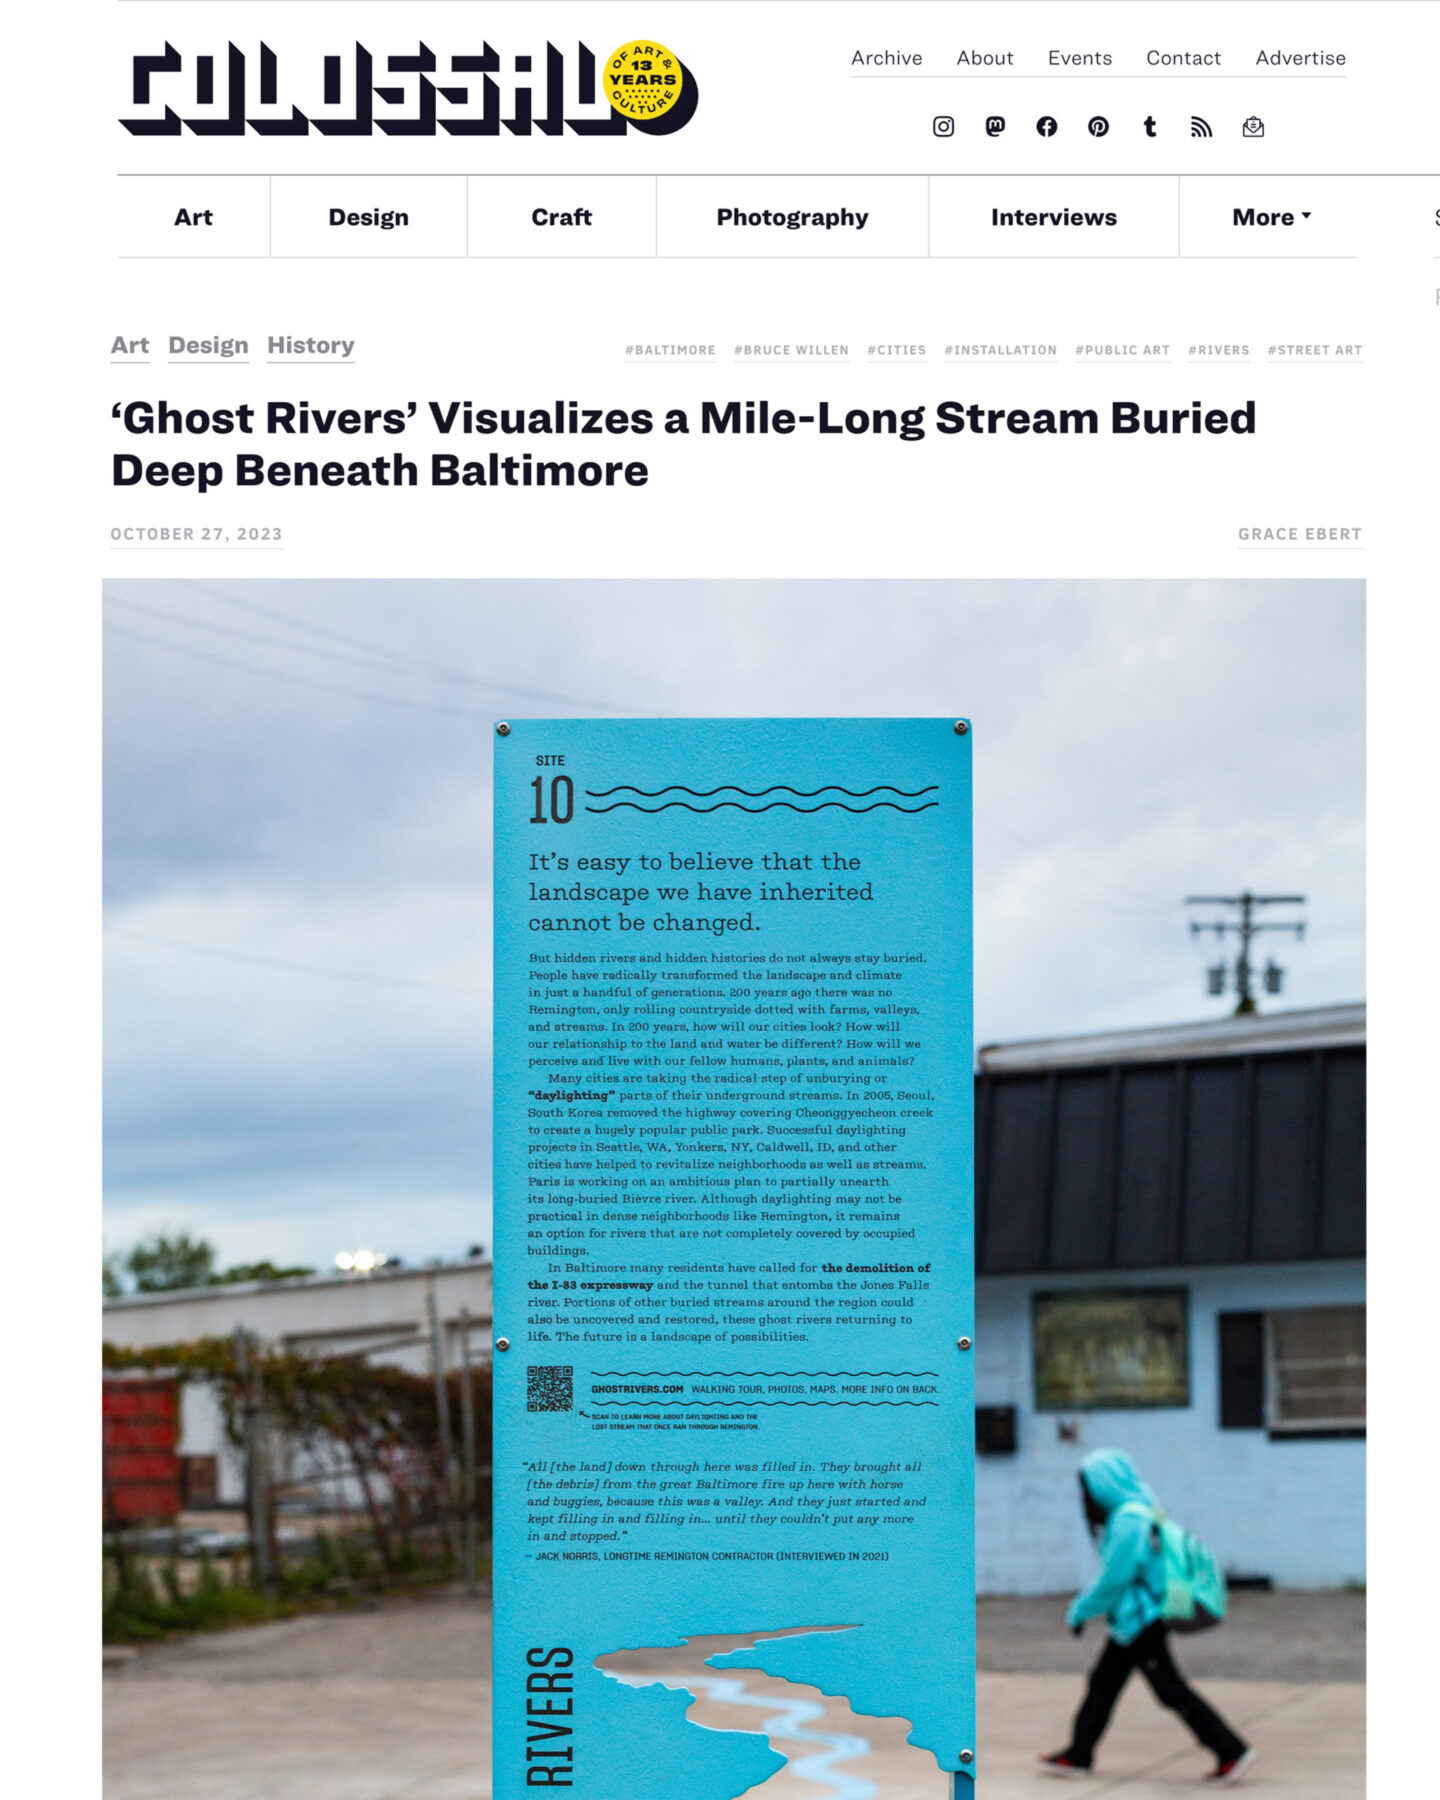 Colossal feature article on Ghost Rivers — ‘Ghost Rivers’ Visualizes a Mile-Long Stream Buried Deep Beneath Baltimore